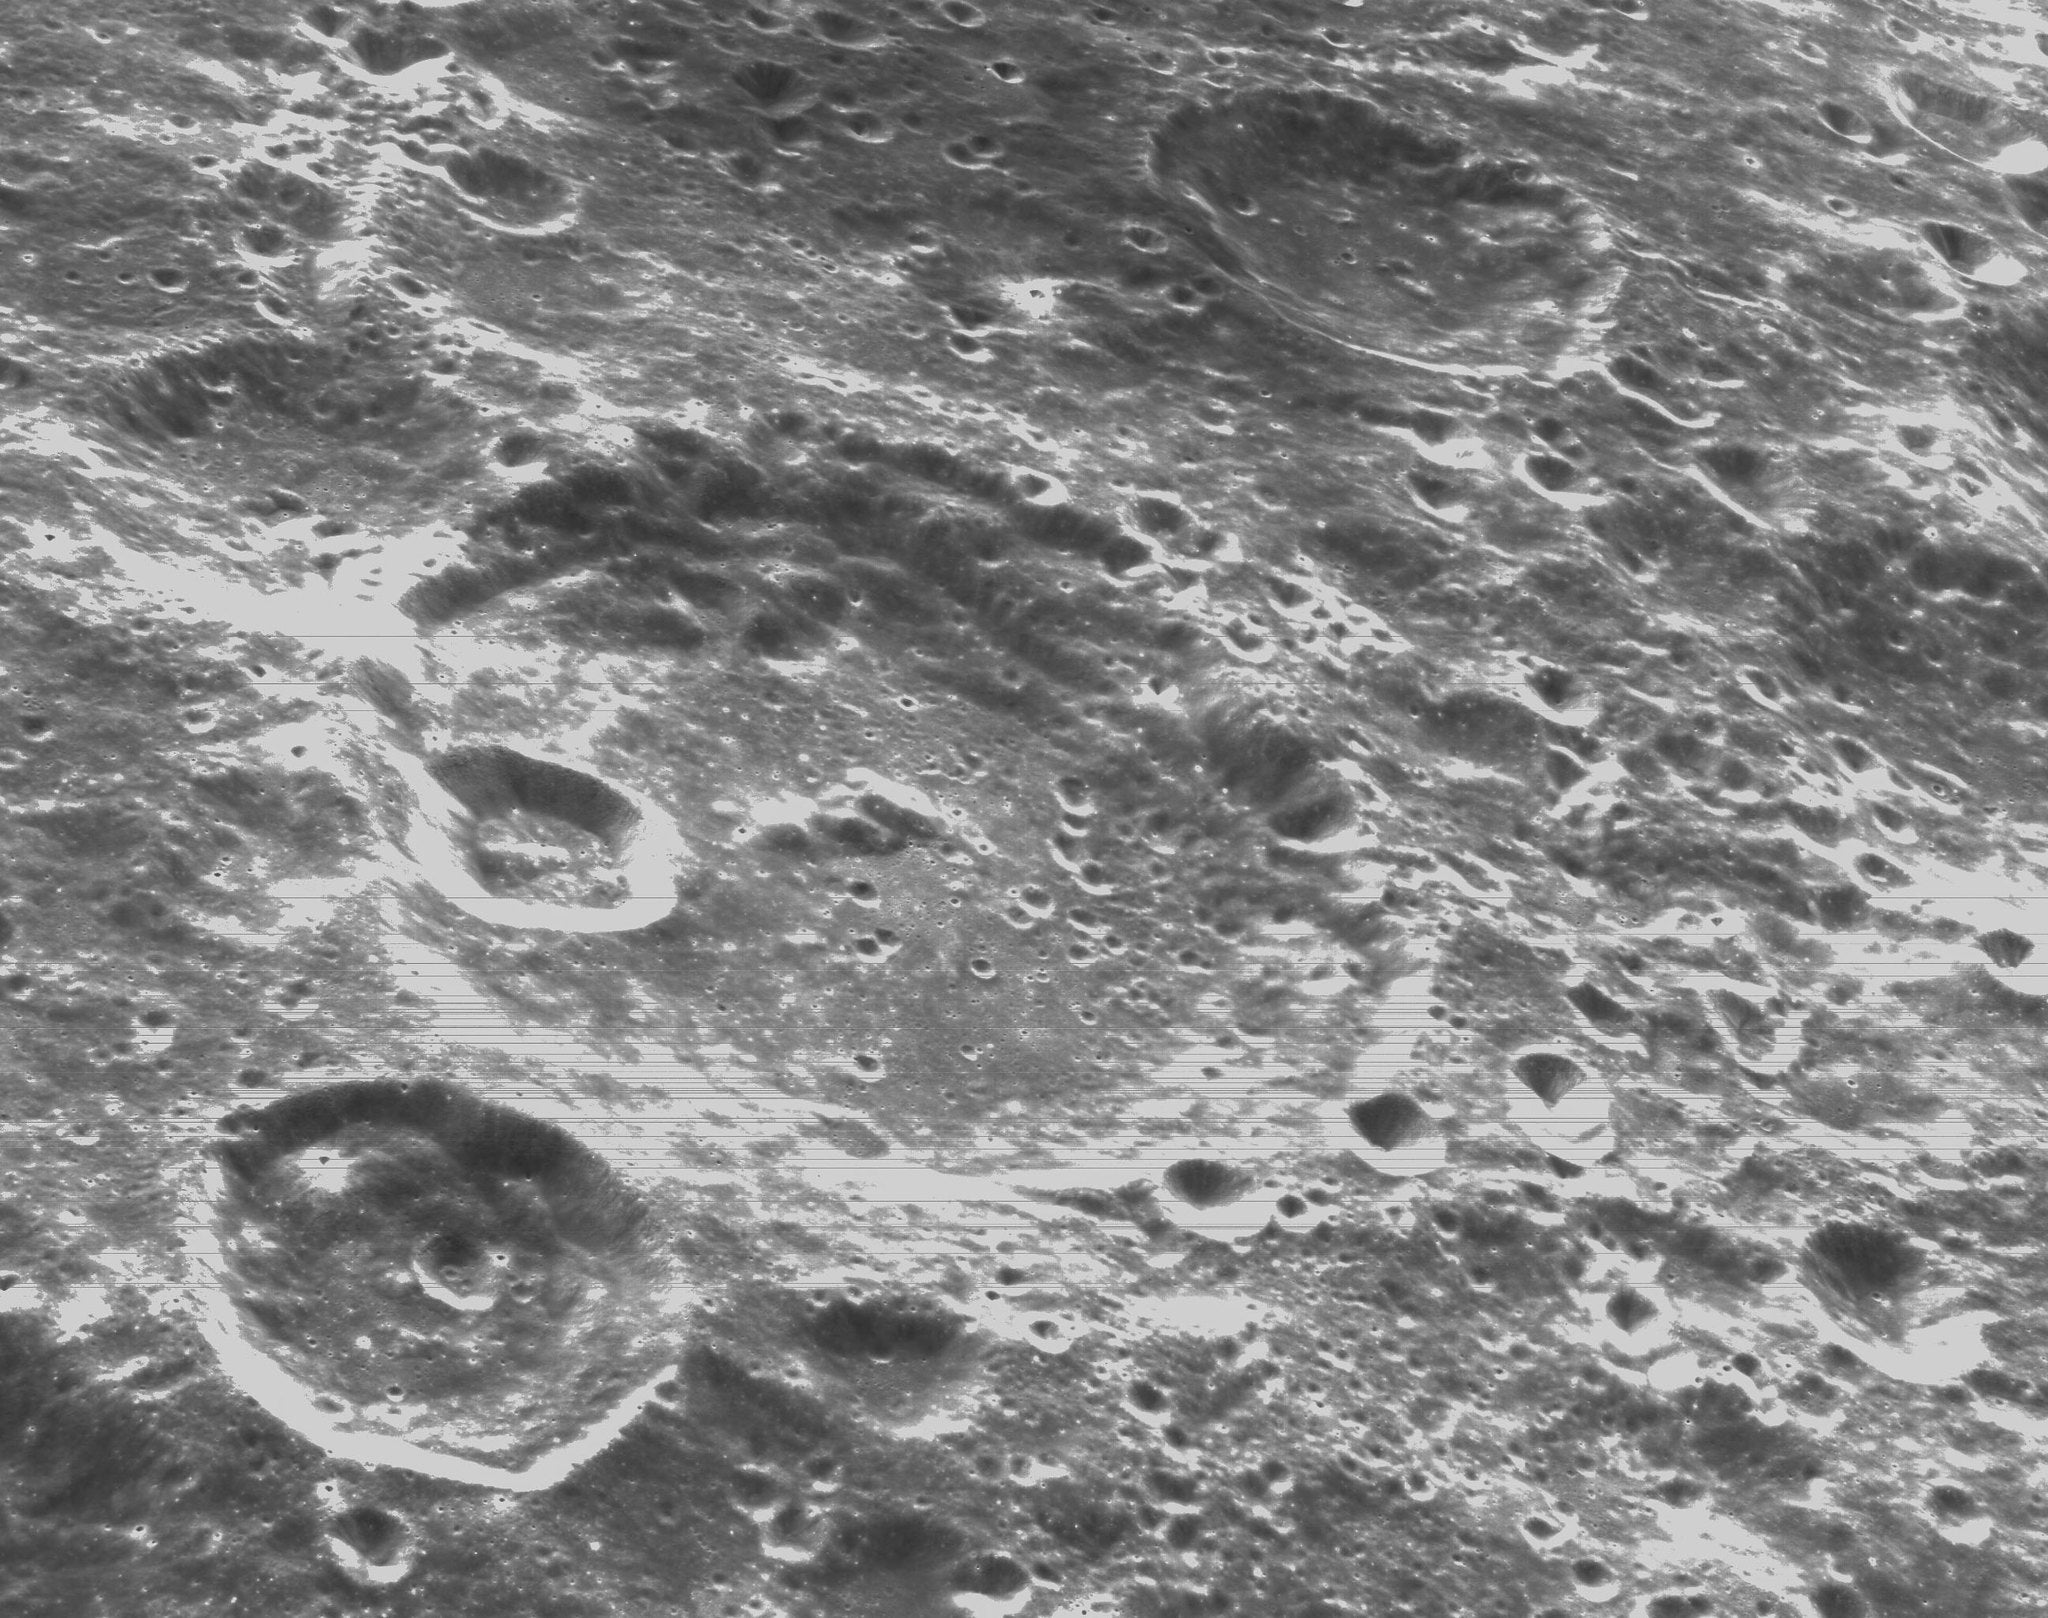 The pock-marked lunar surface, as seen by Orion.  (Image: NASA)